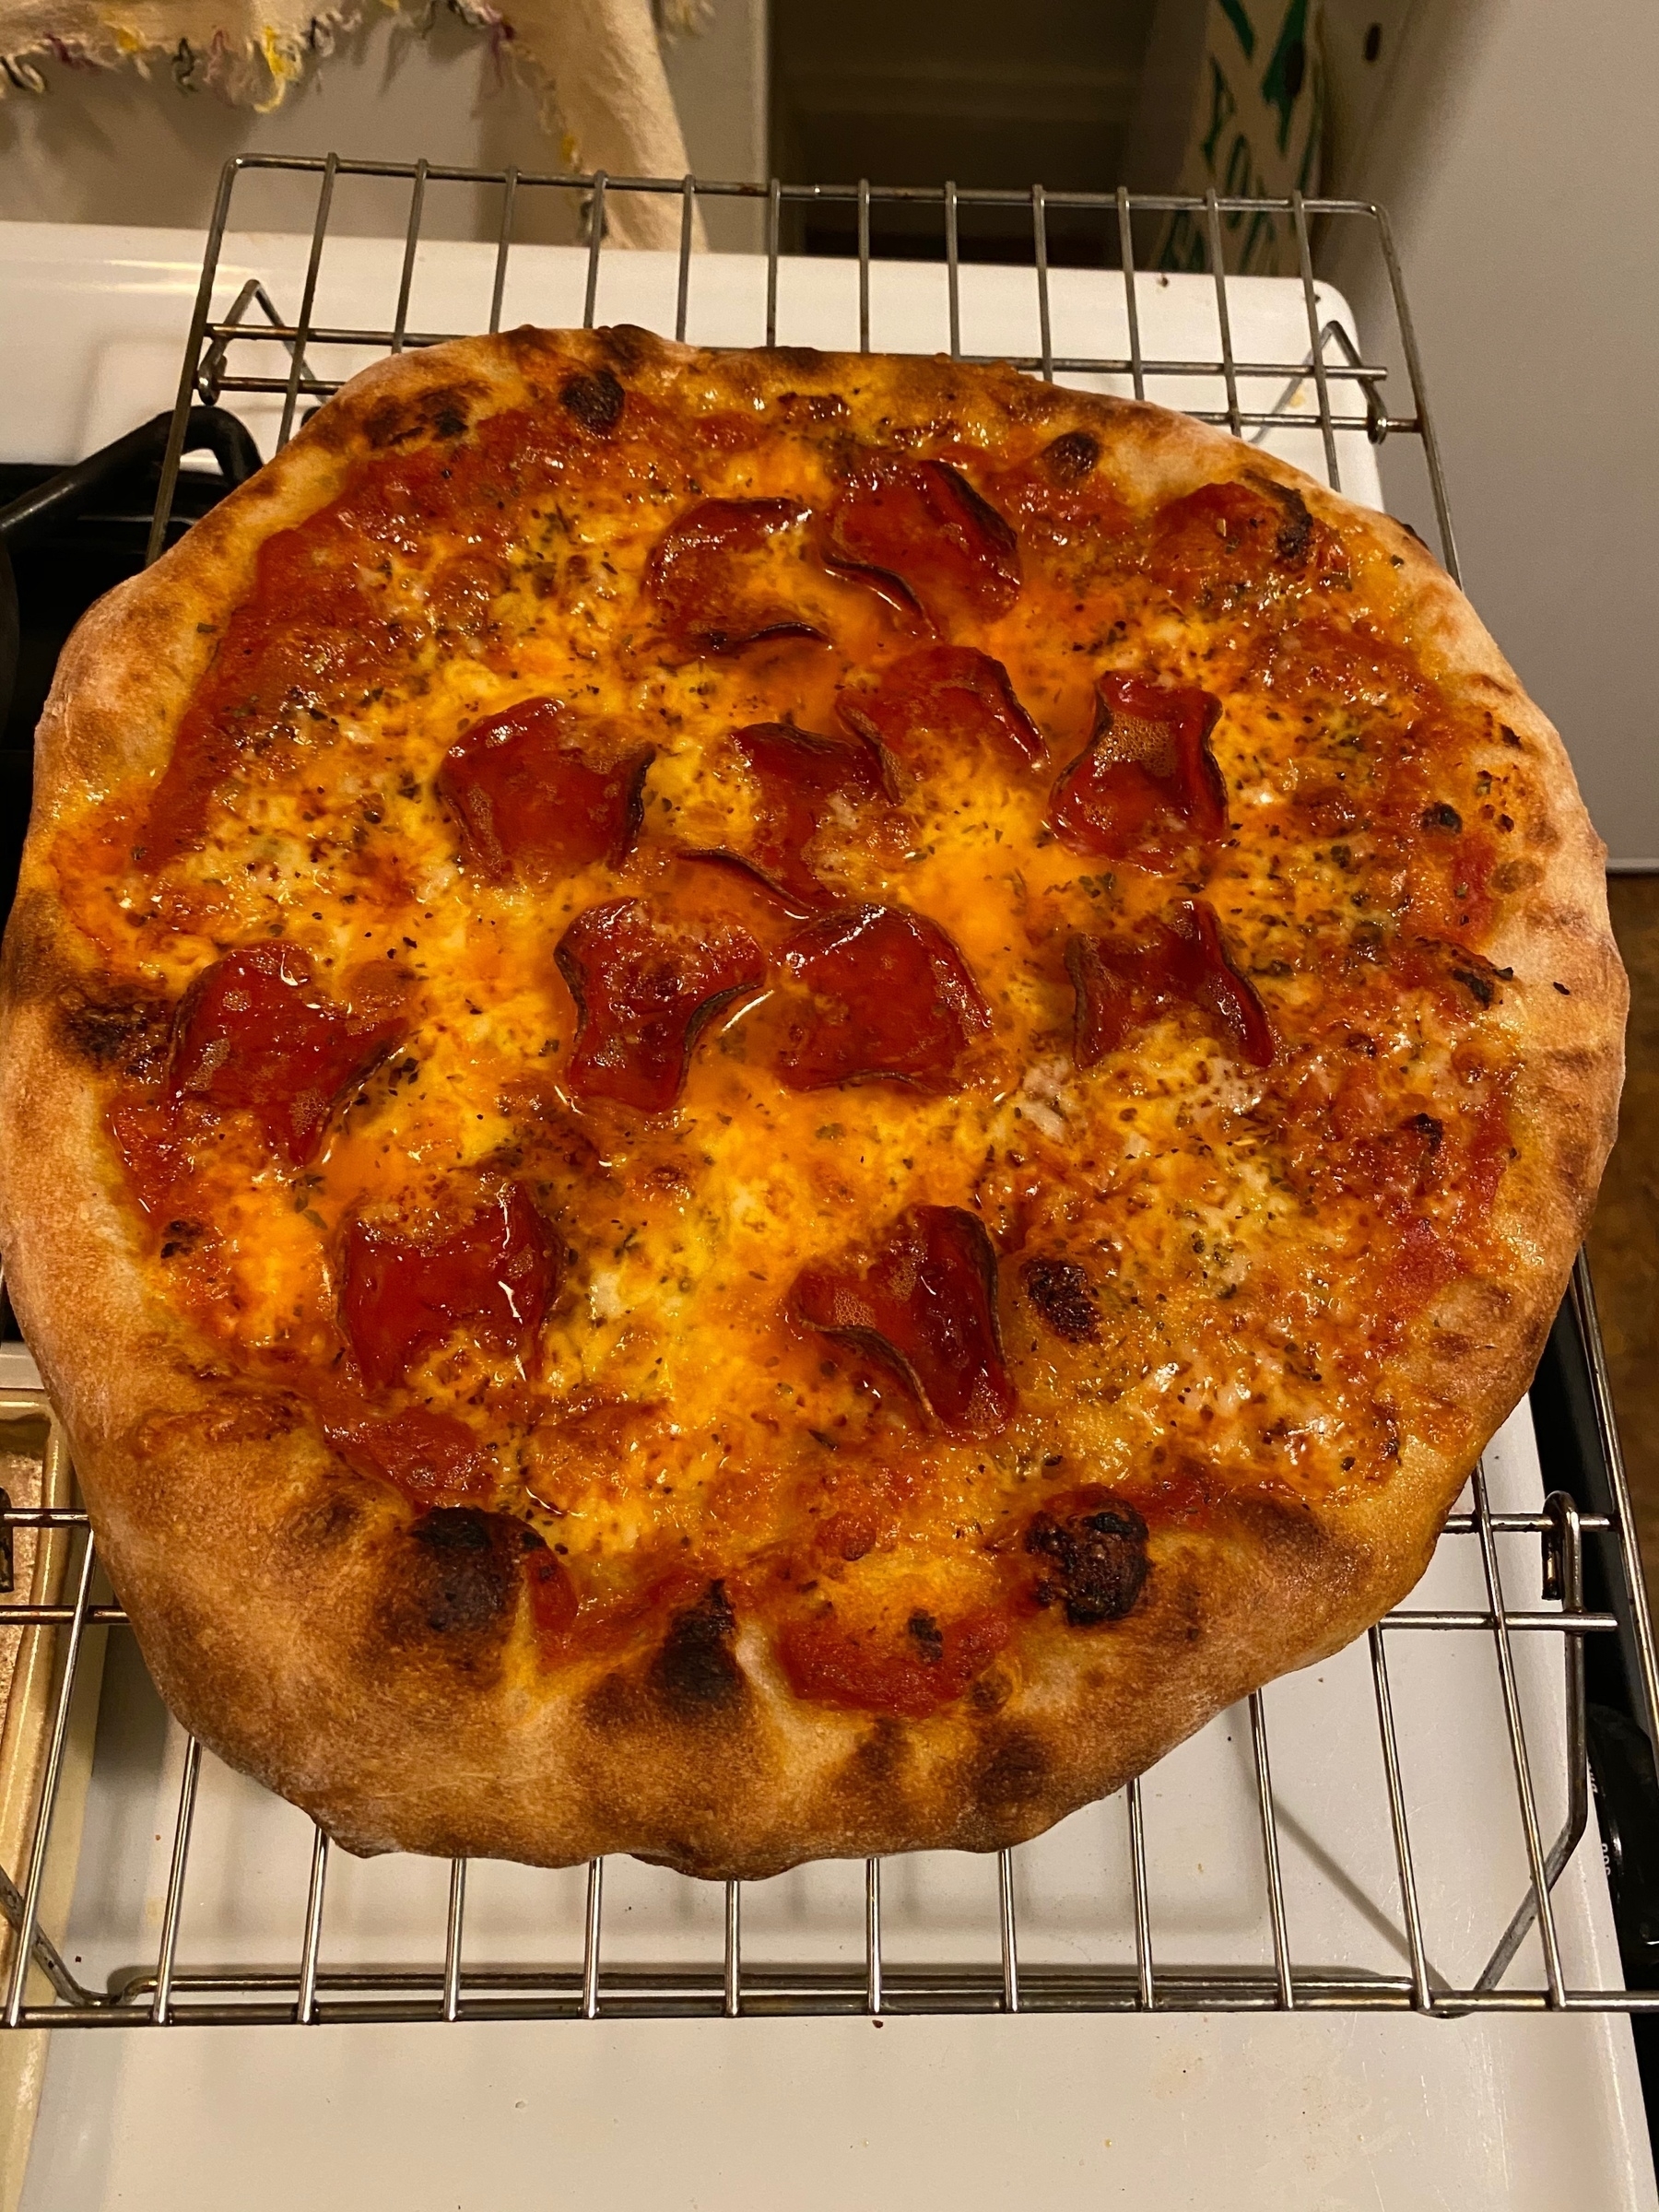 A small pepperoni pizza on a cooling rack.